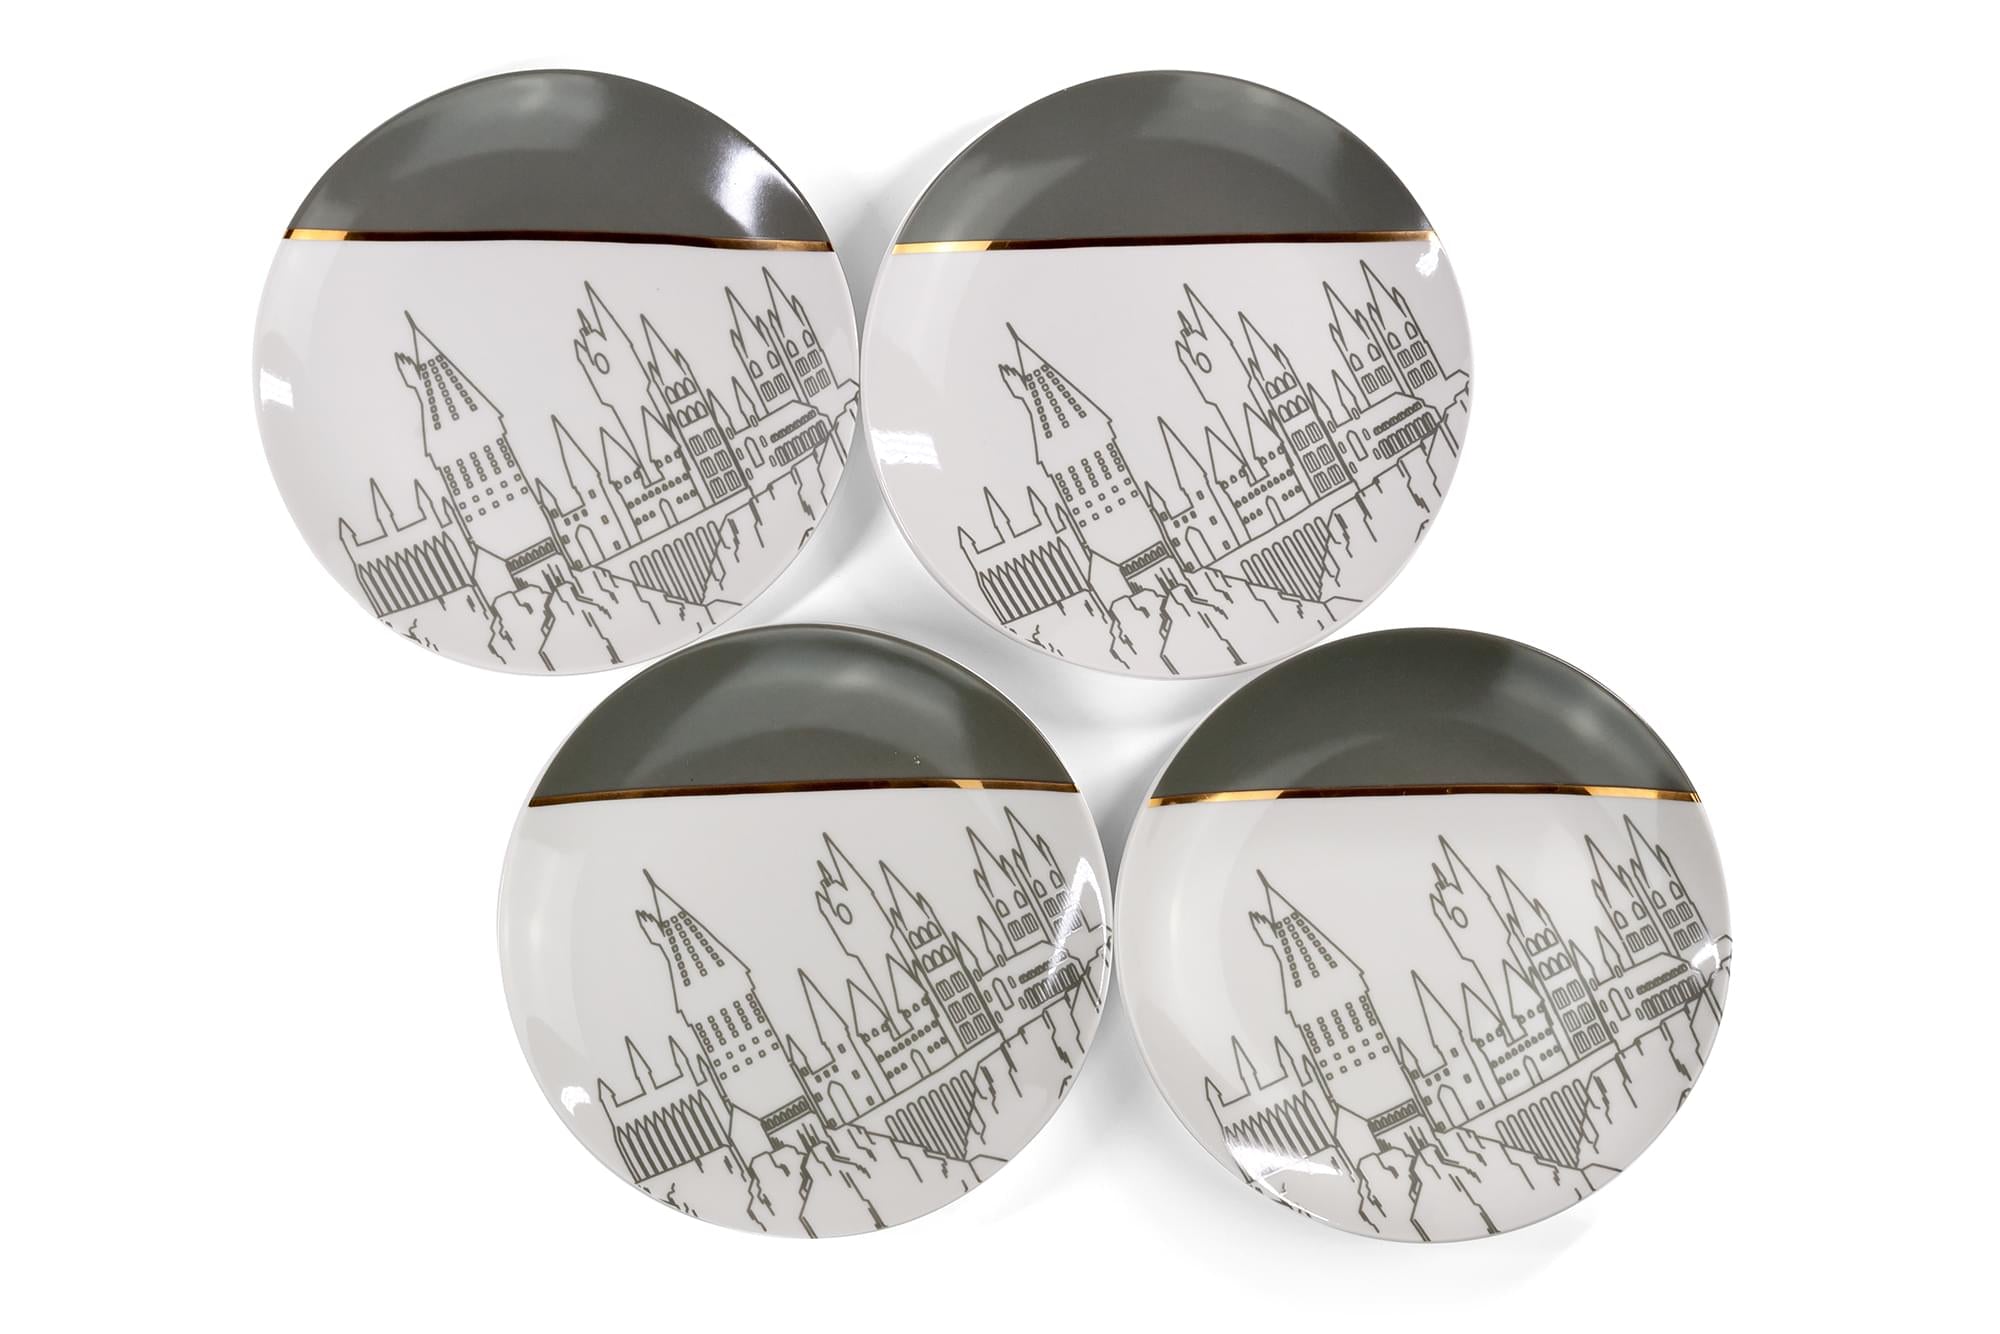 These Harry Potter Plates Will Make You Feel Like You're at Hogwarts